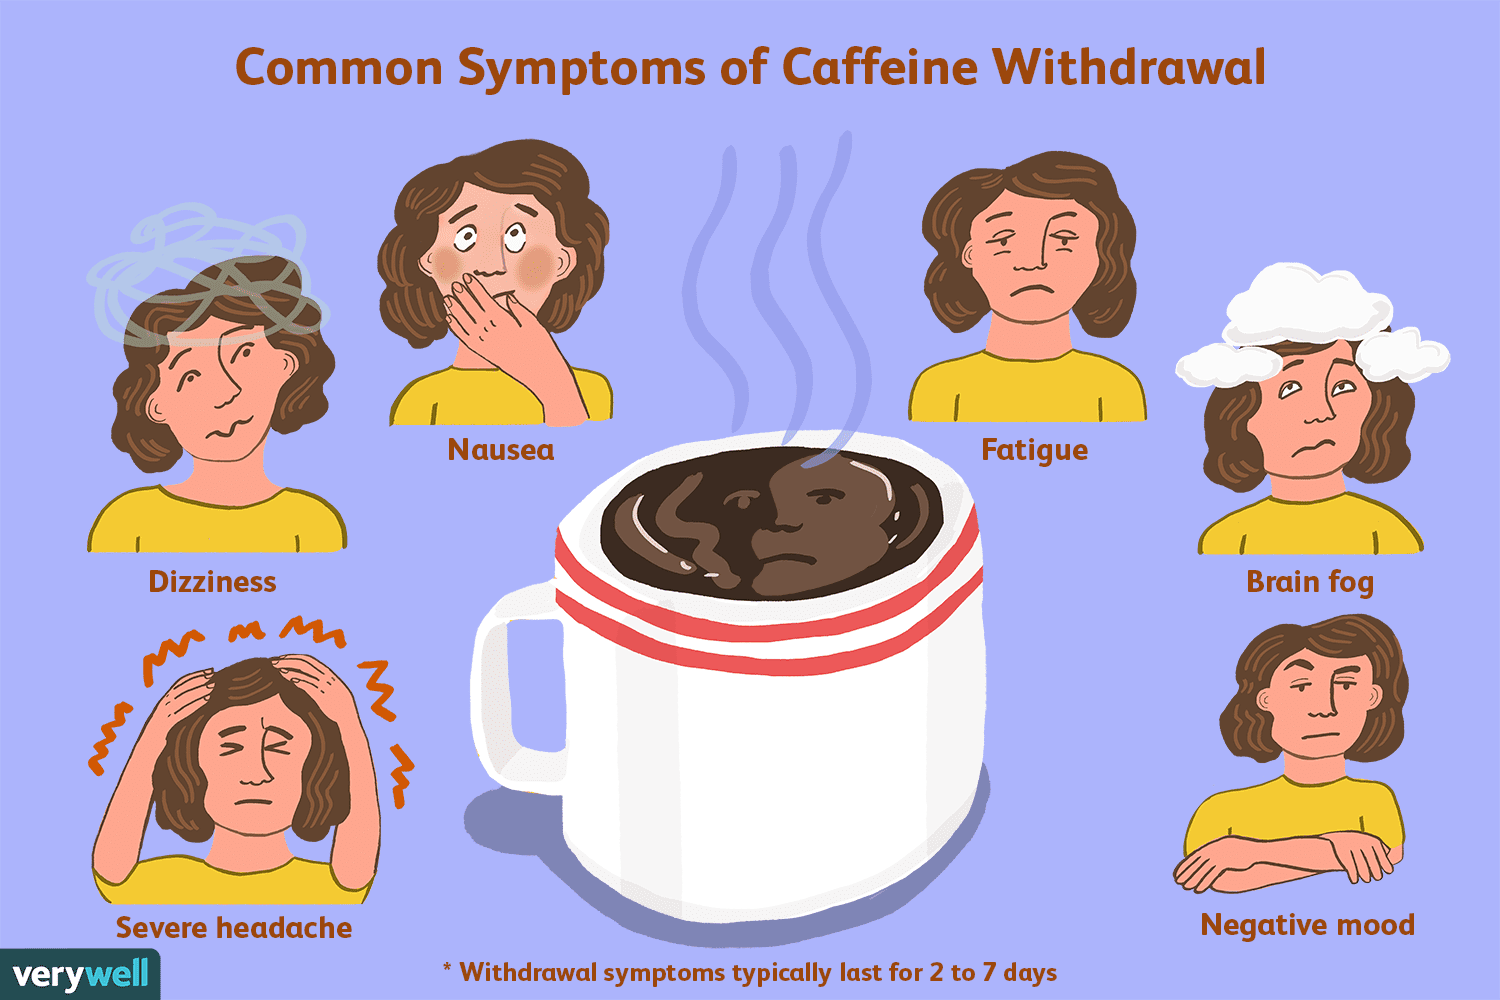 Can Caffeine Withdrawal Cause Acid Reflux?